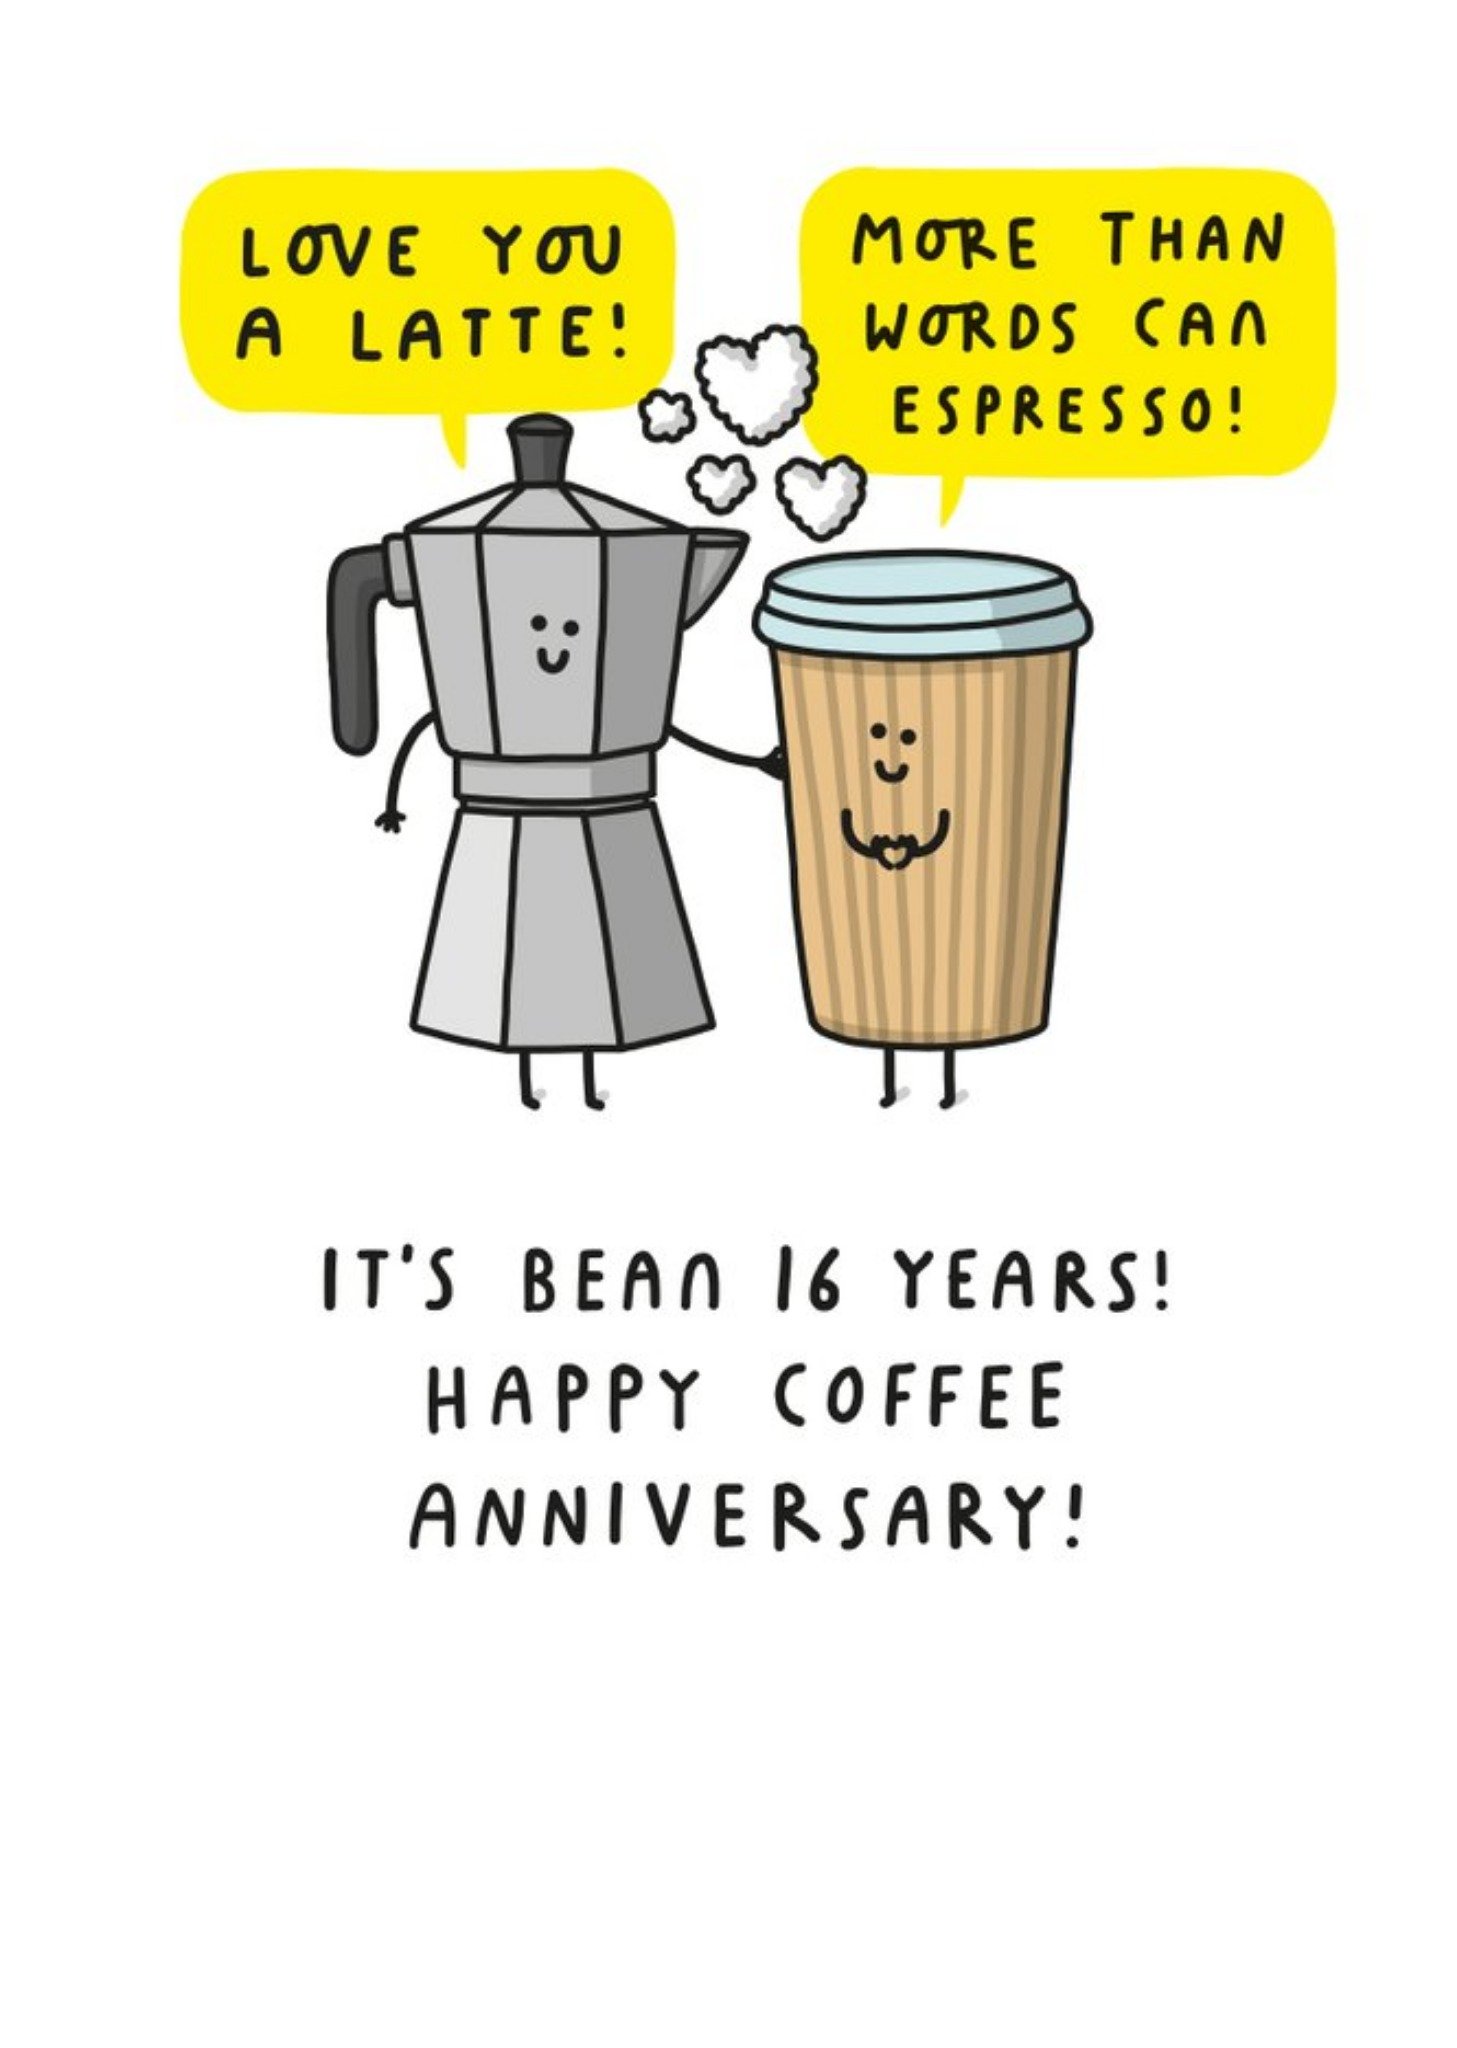 Moonpig Cee Maker And Cup Cartoon Illustration Sixteenth Anniversary Funny Pun Card, Large